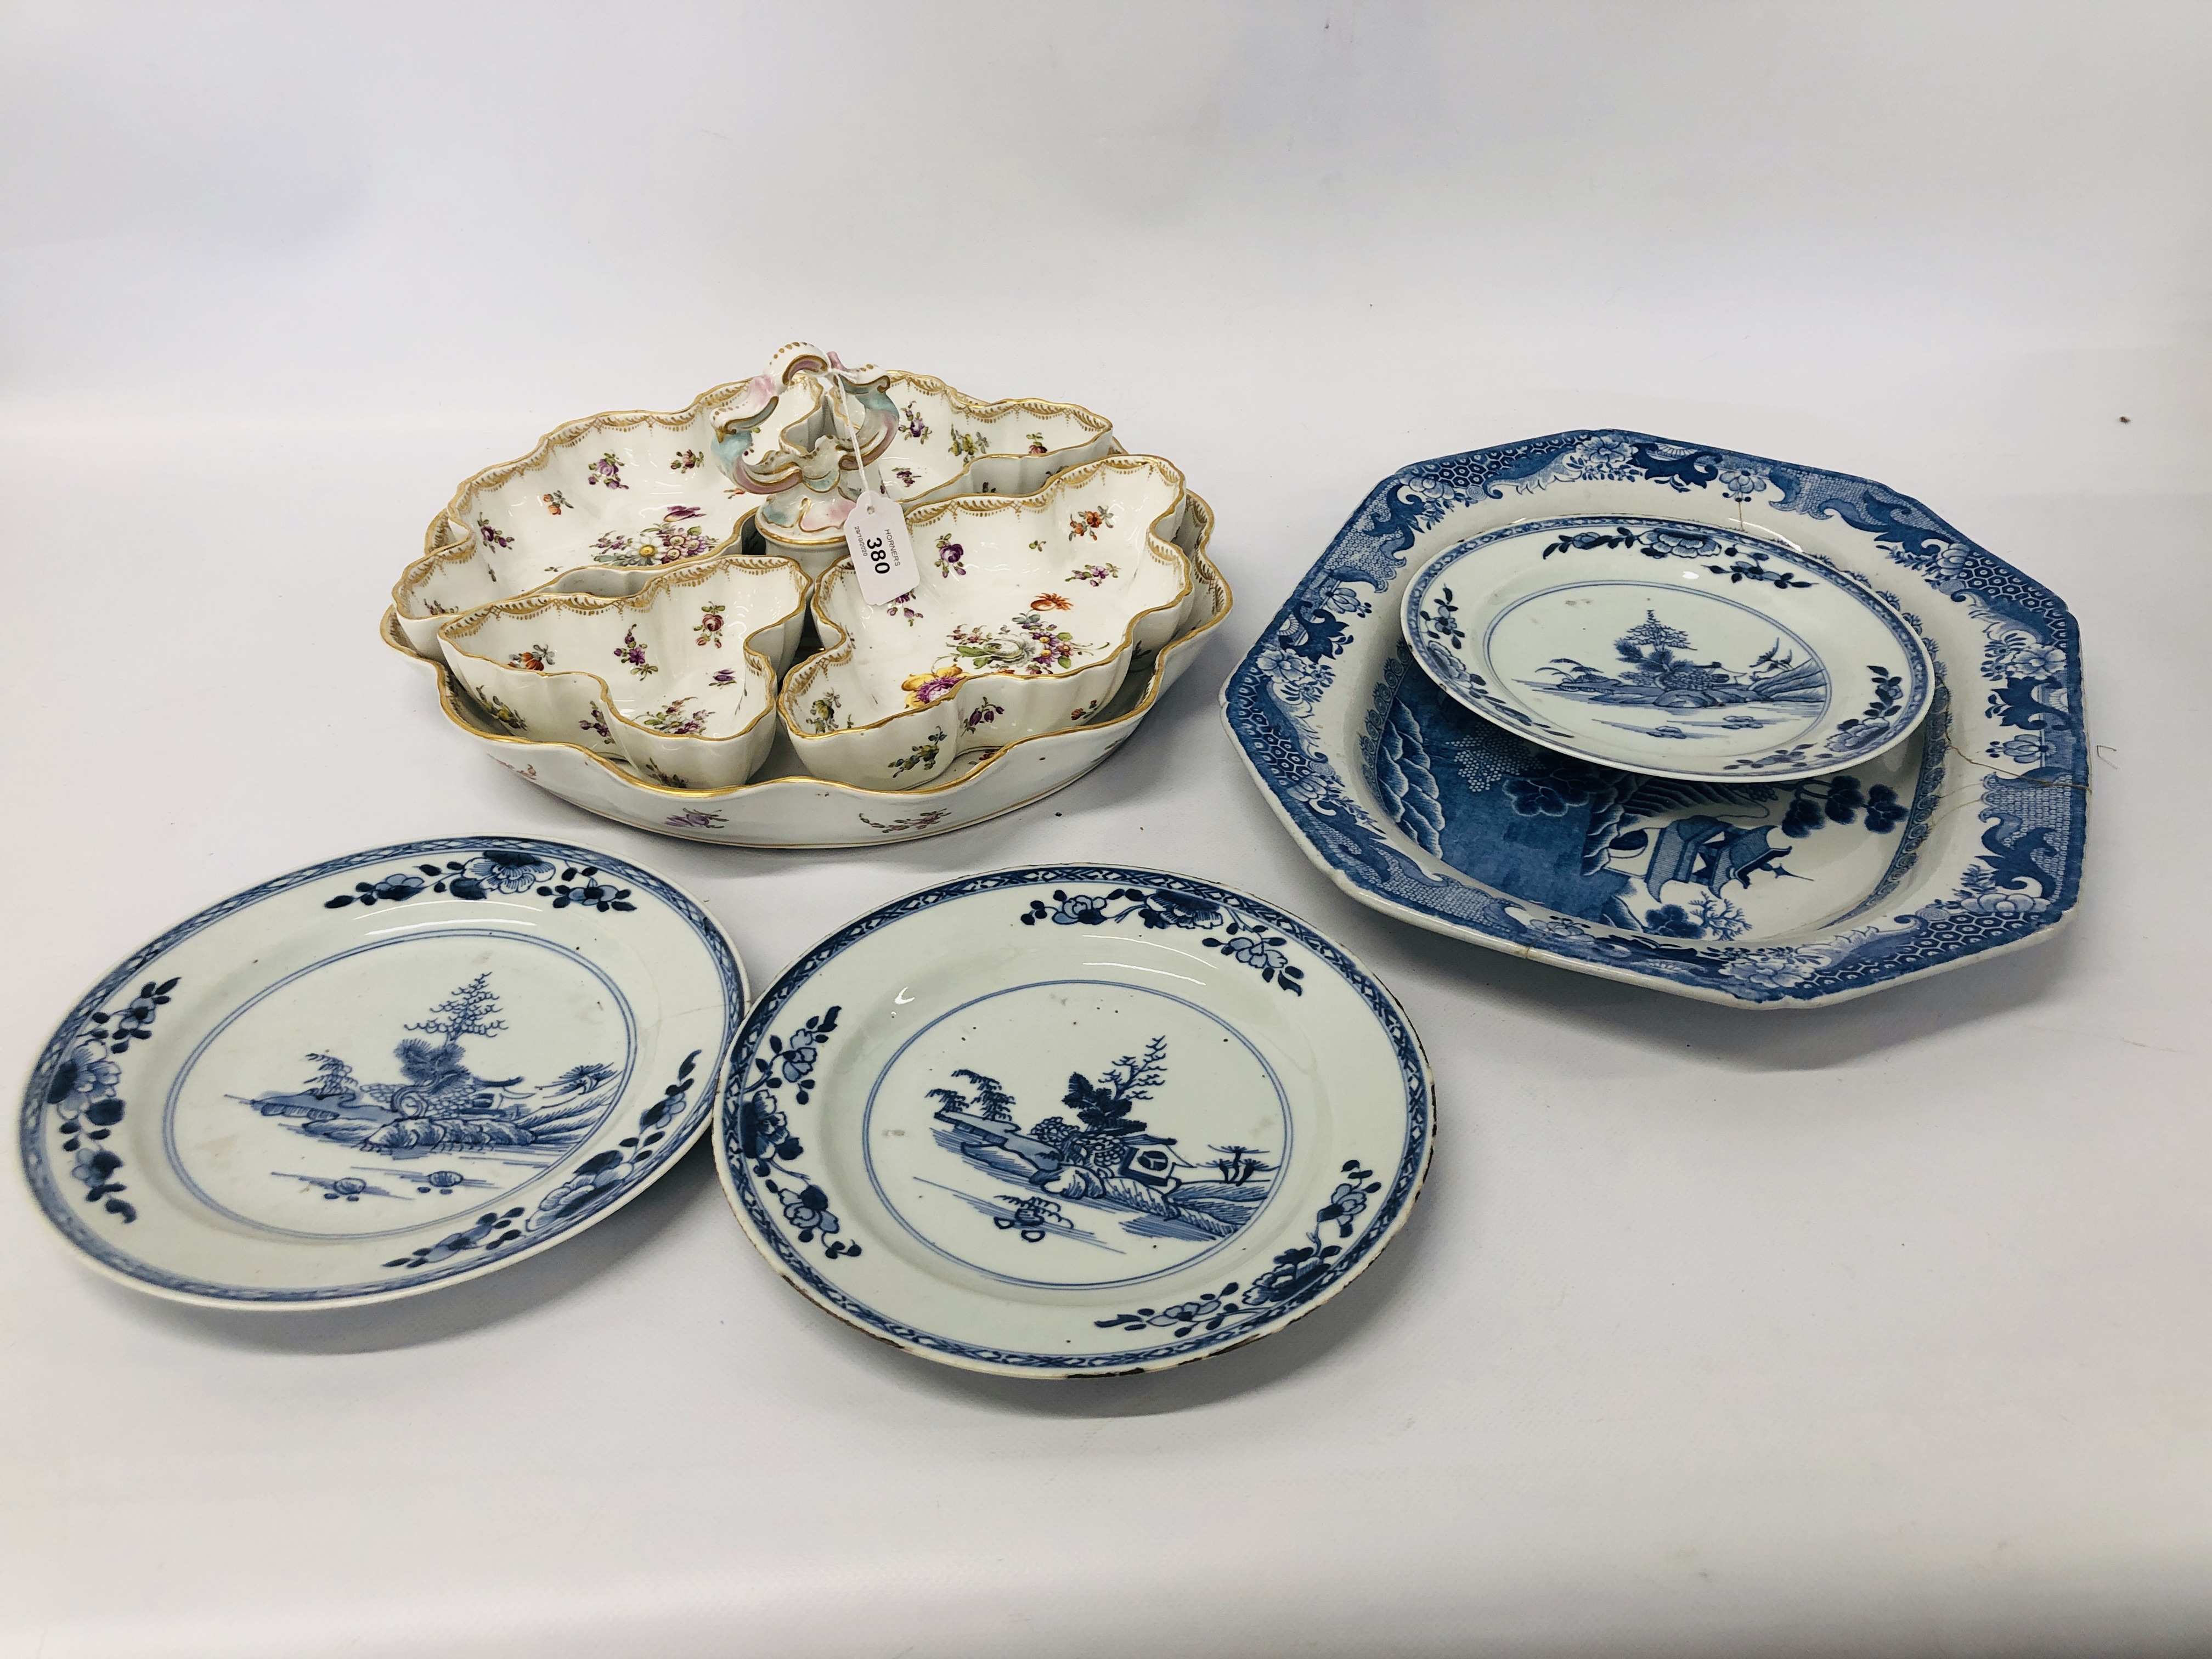 3 CHINESE BLUE AND WHITE PLATES (ONE CRACKED),